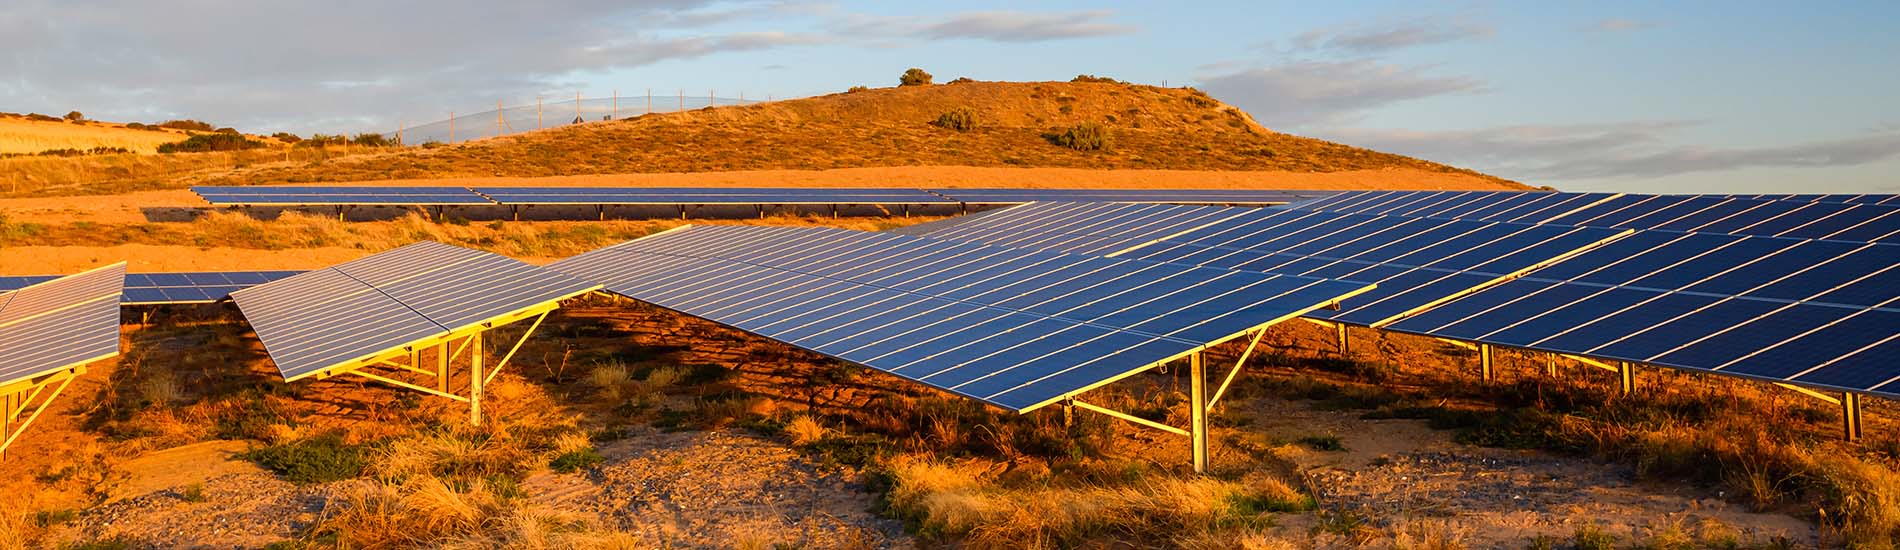 Solar panel farm at sunset located in South Australia